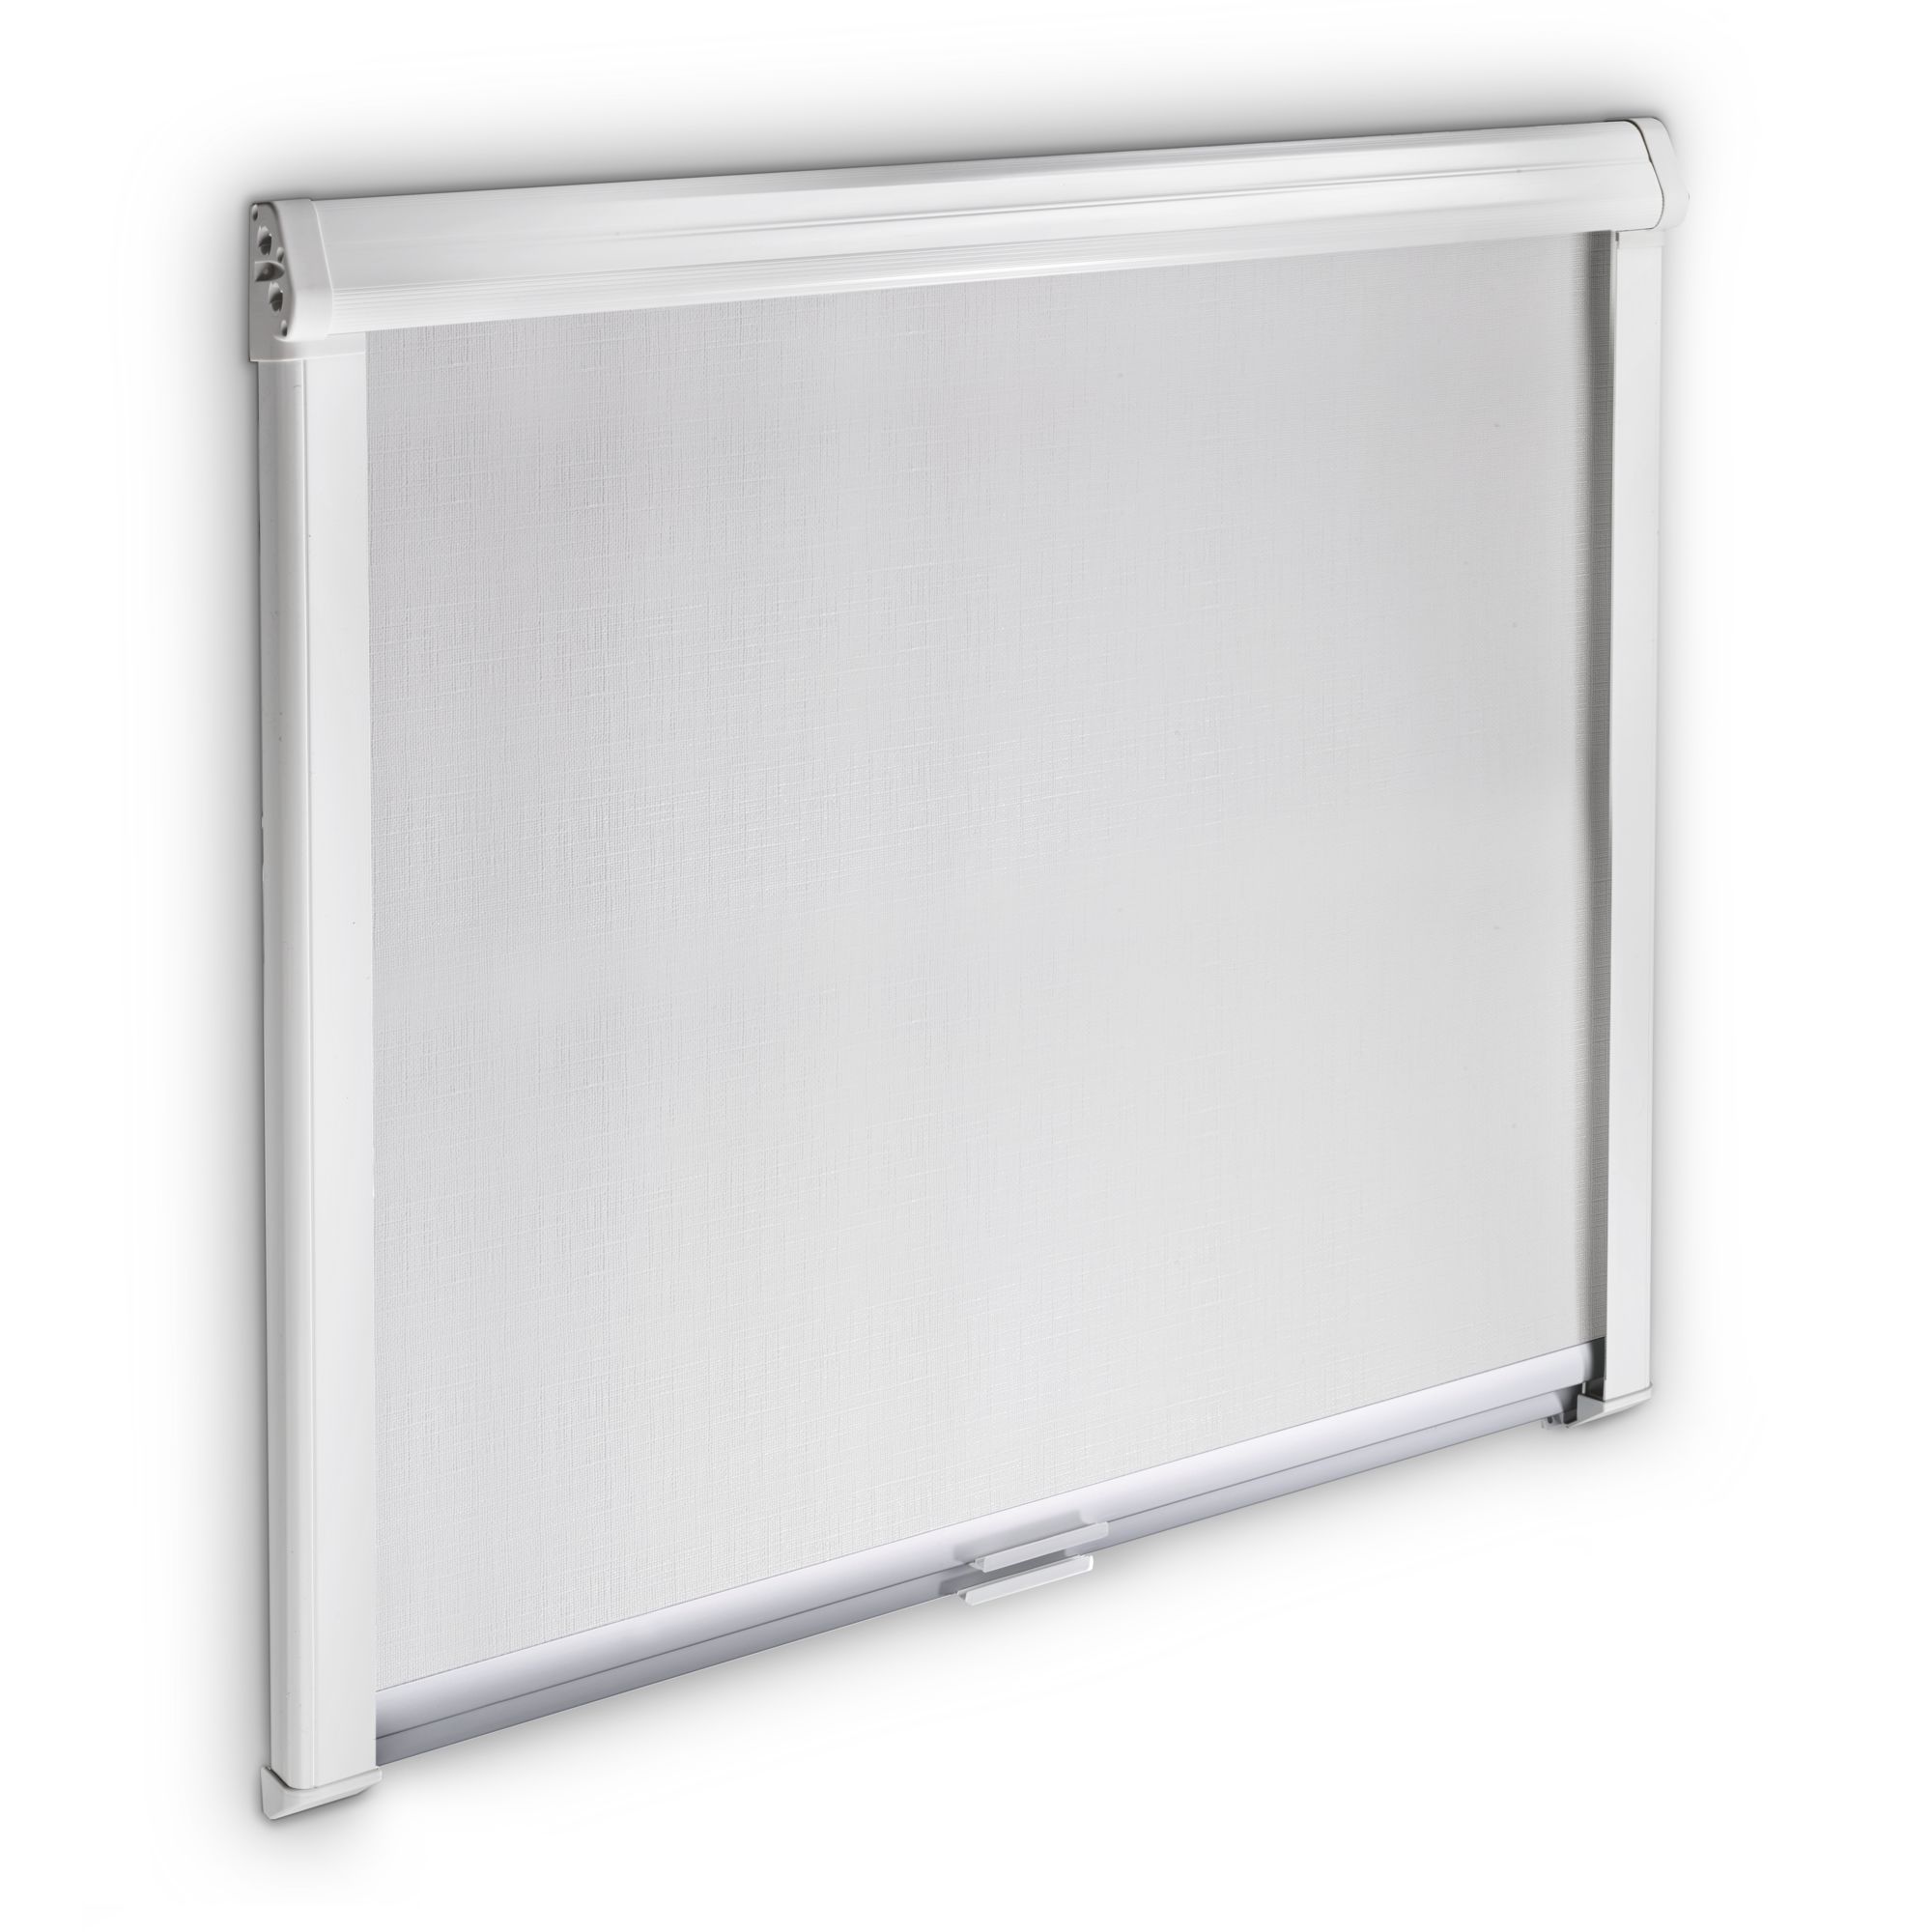 Dometic Black-Out Roller Blind 3000, 660 x 710 mm, grey-white